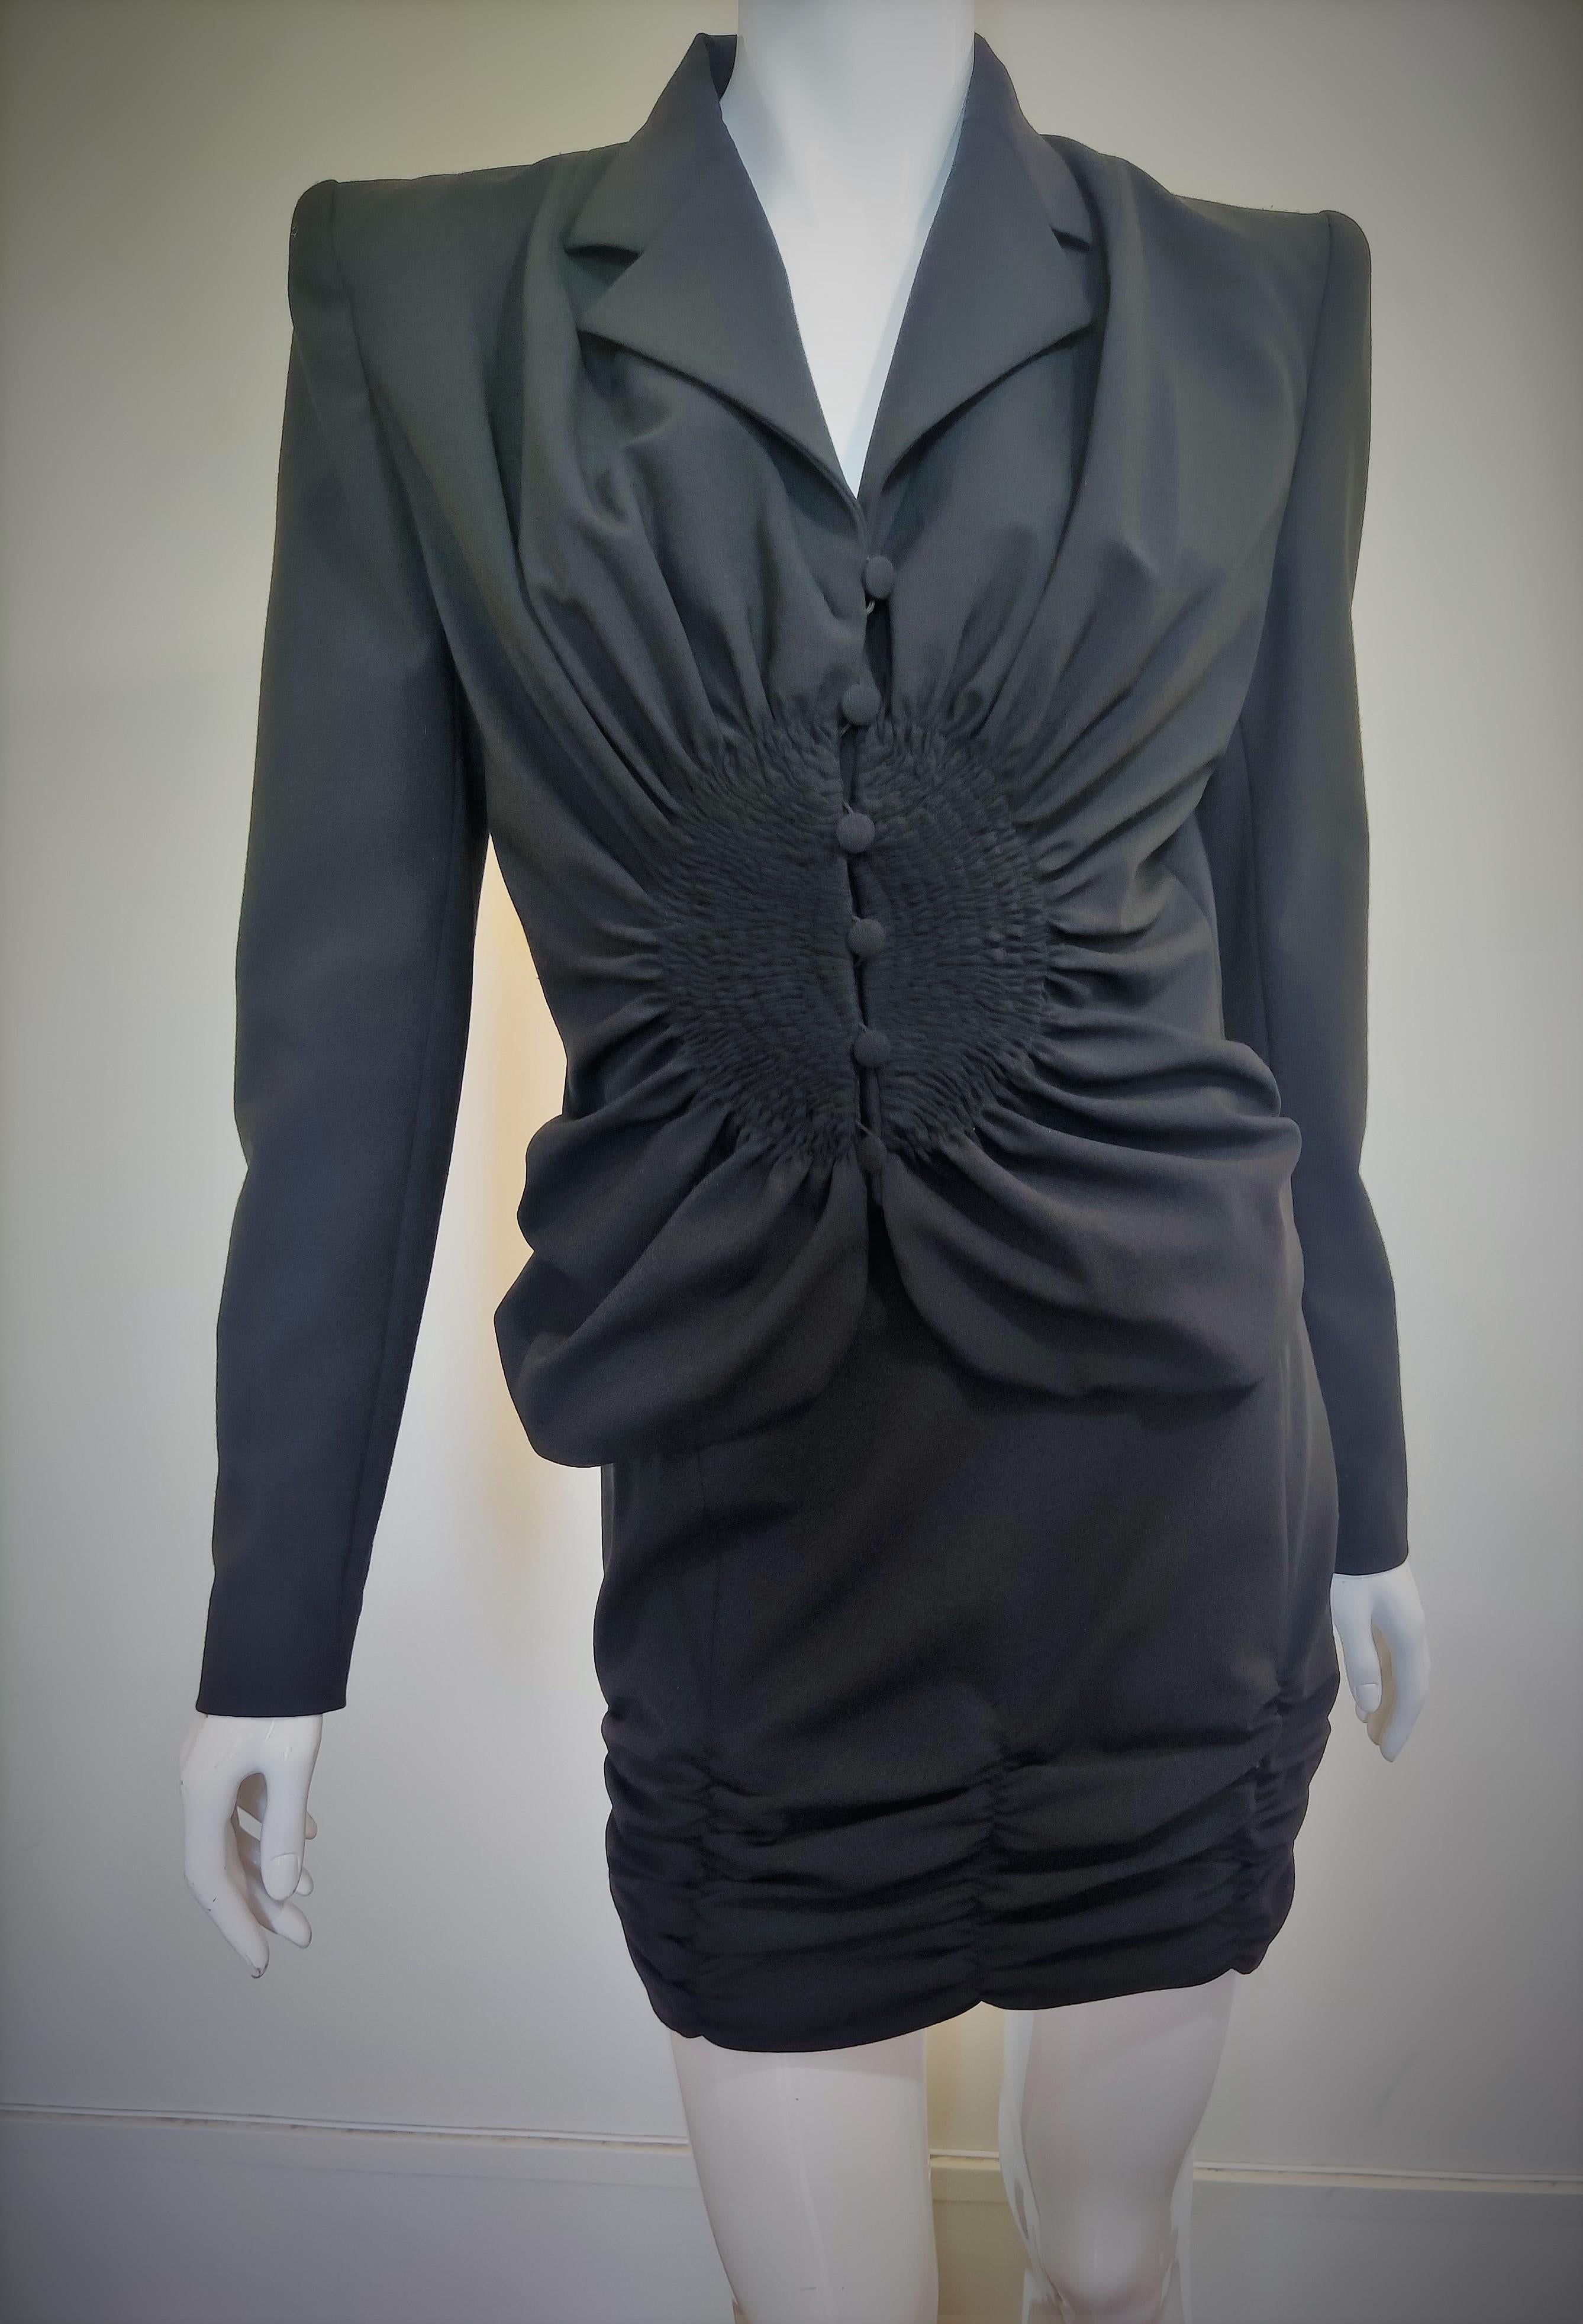 Early beautiful piece by John Galliano!
Skirt + jacket suit set!
With shoulder pads. Wide shoulder look!
Wasp waist  silhouette.

LIKE NEW condition!

Jacket is designed with pointed collar, long sleeve featuring buttoned-down fastening and ruched